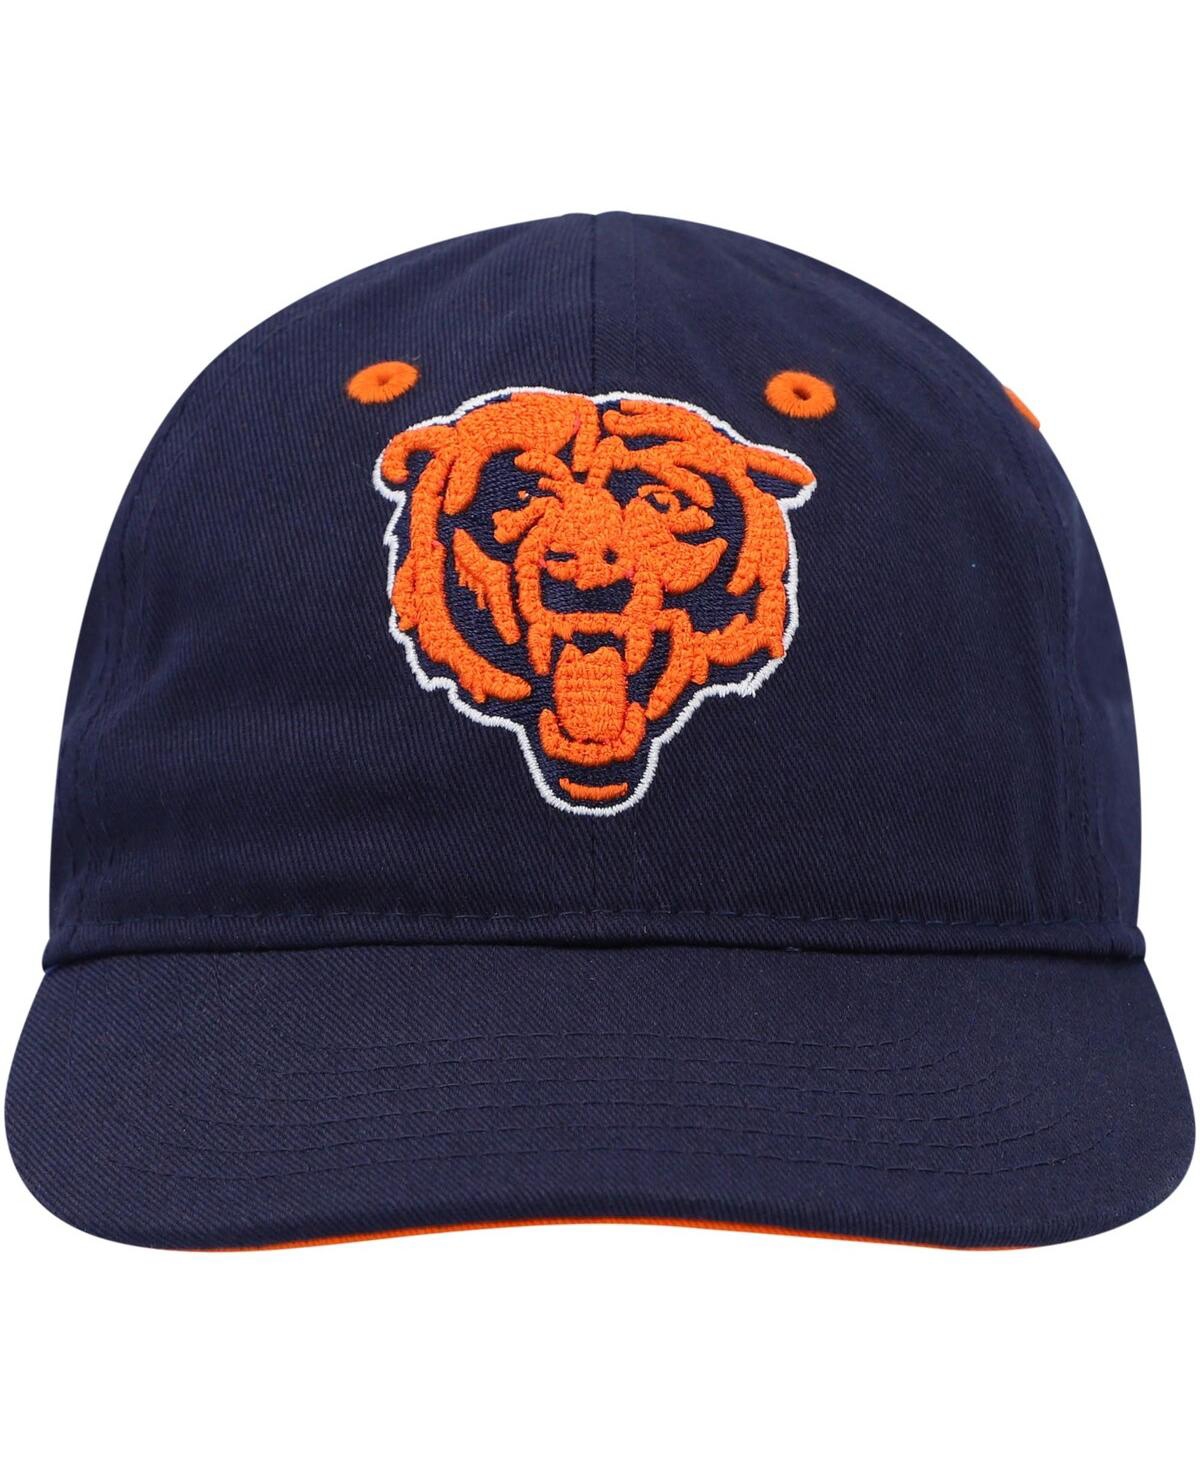 Shop Outerstuff Newborn And Infant Boys And Girls Navy Chicago Bears Slouch Flex Hat